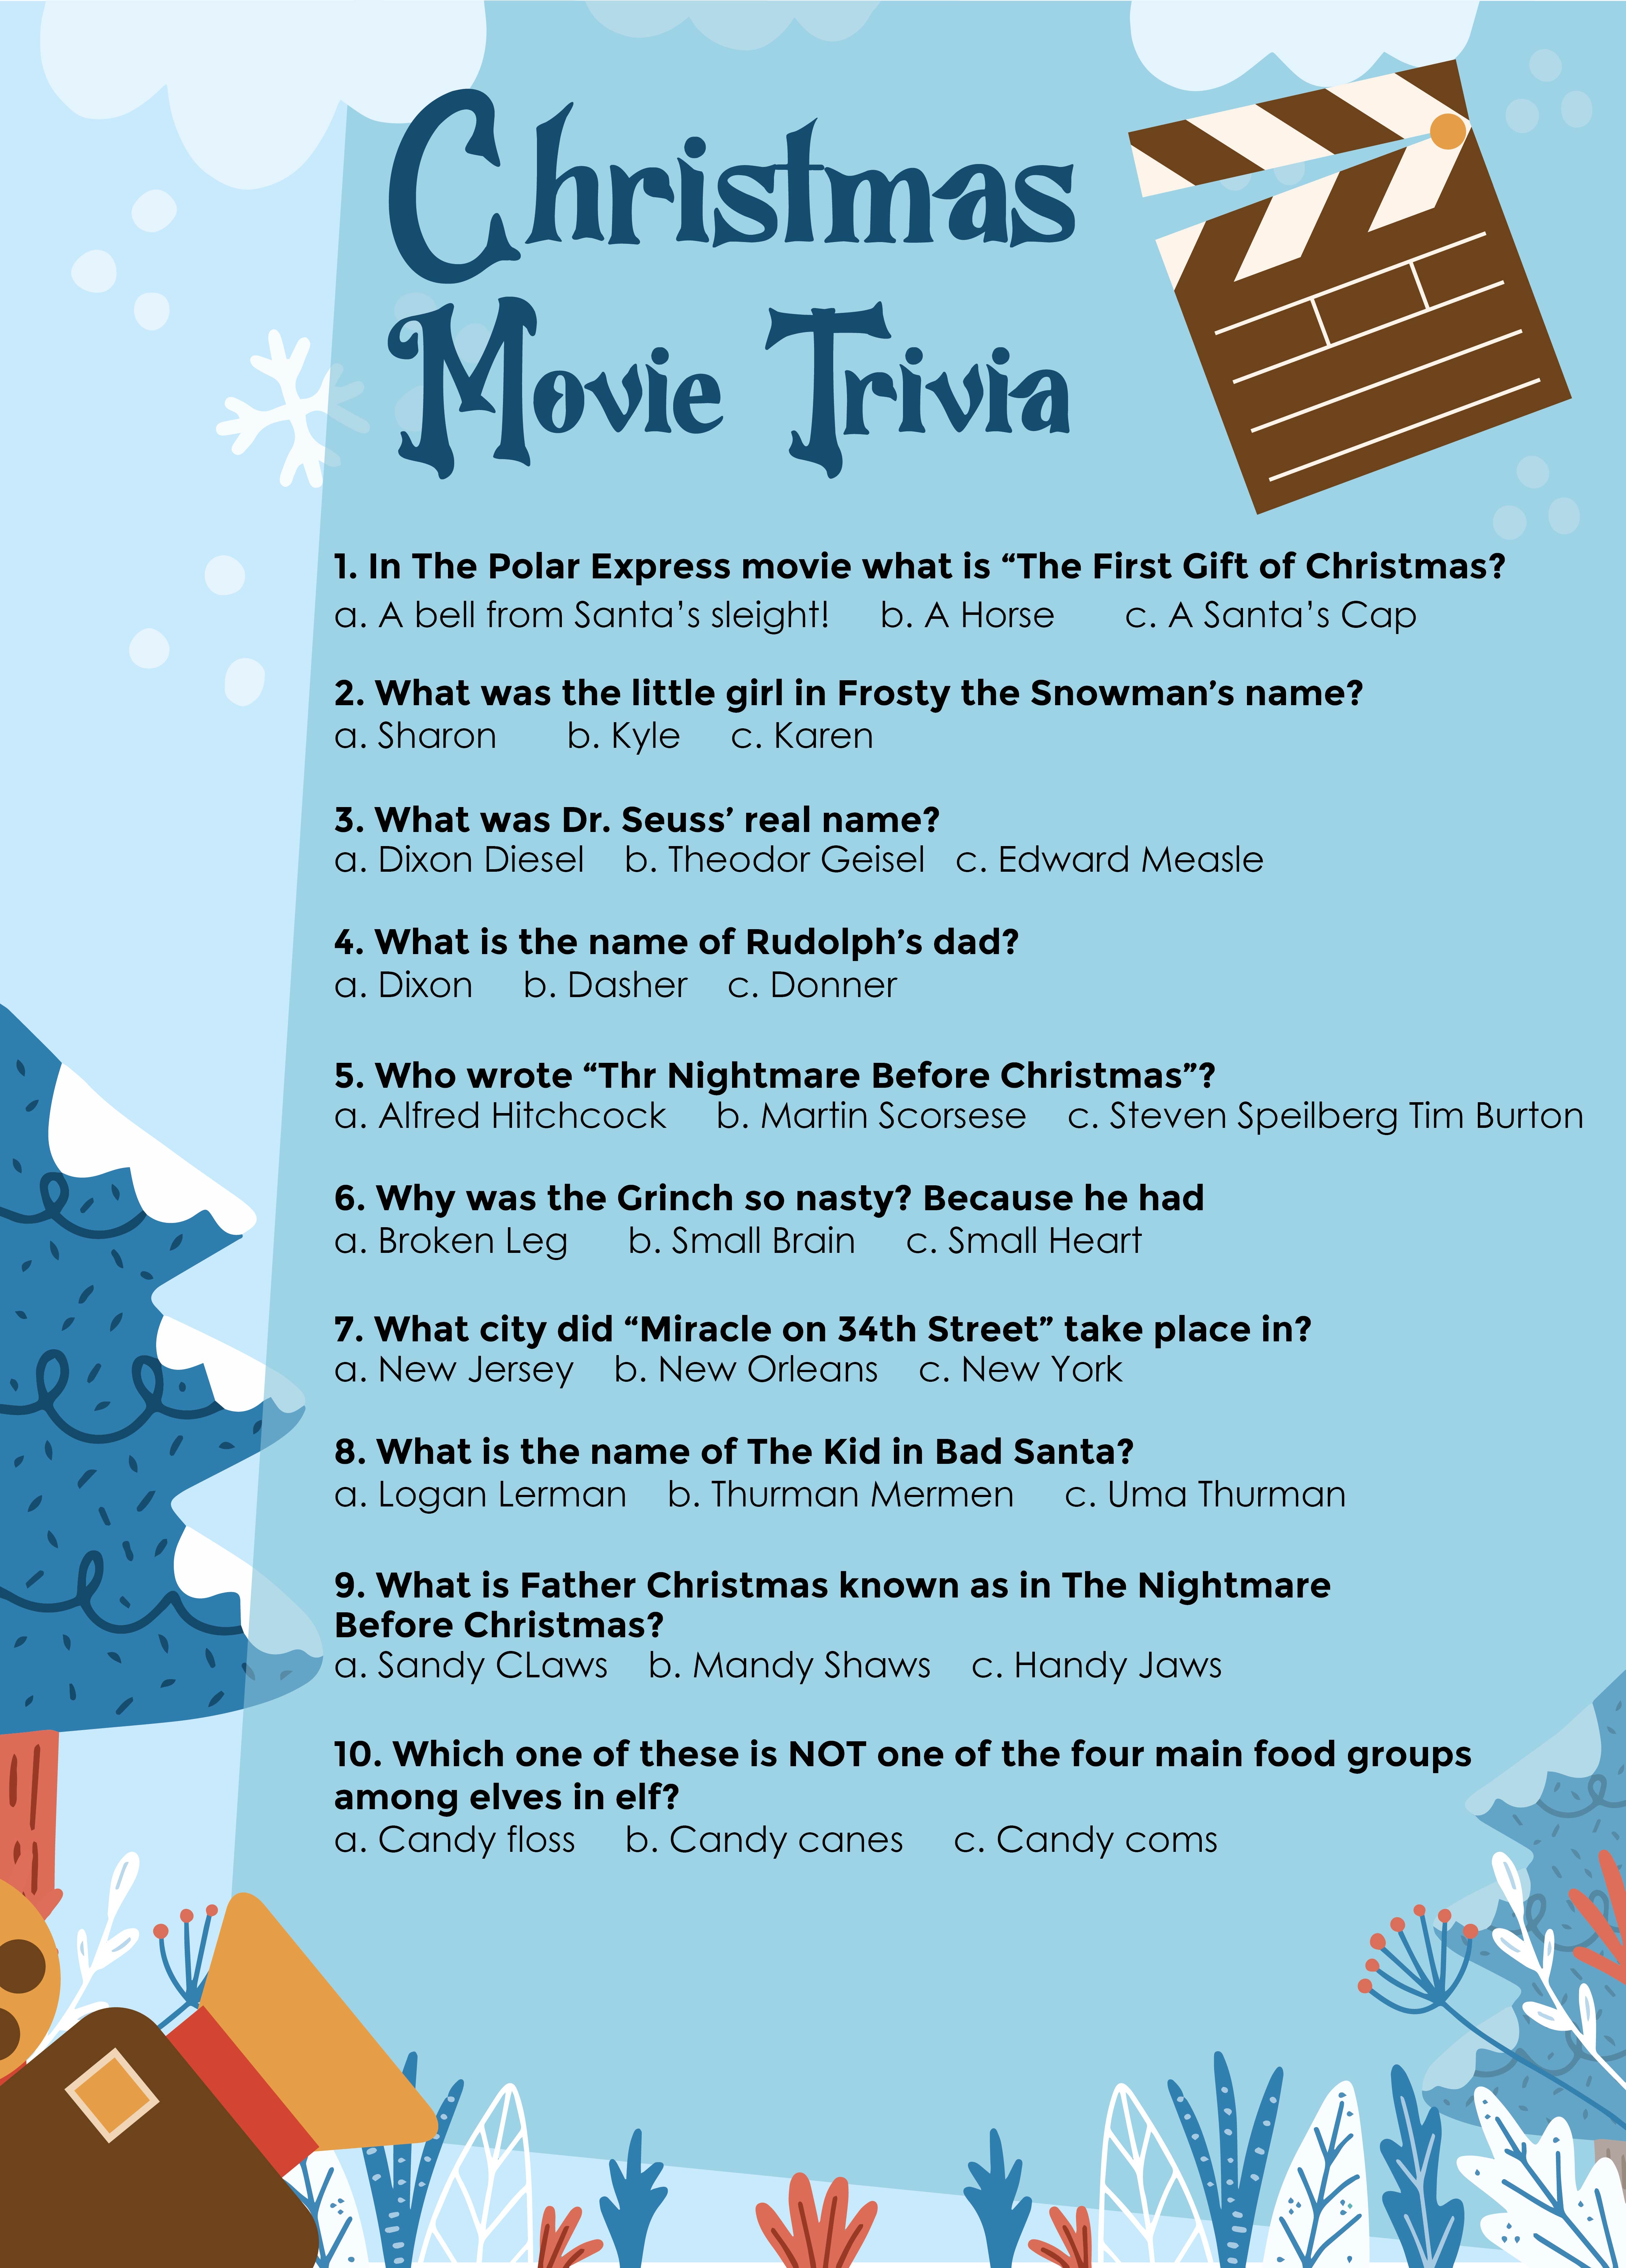 holiday movie quote trivia